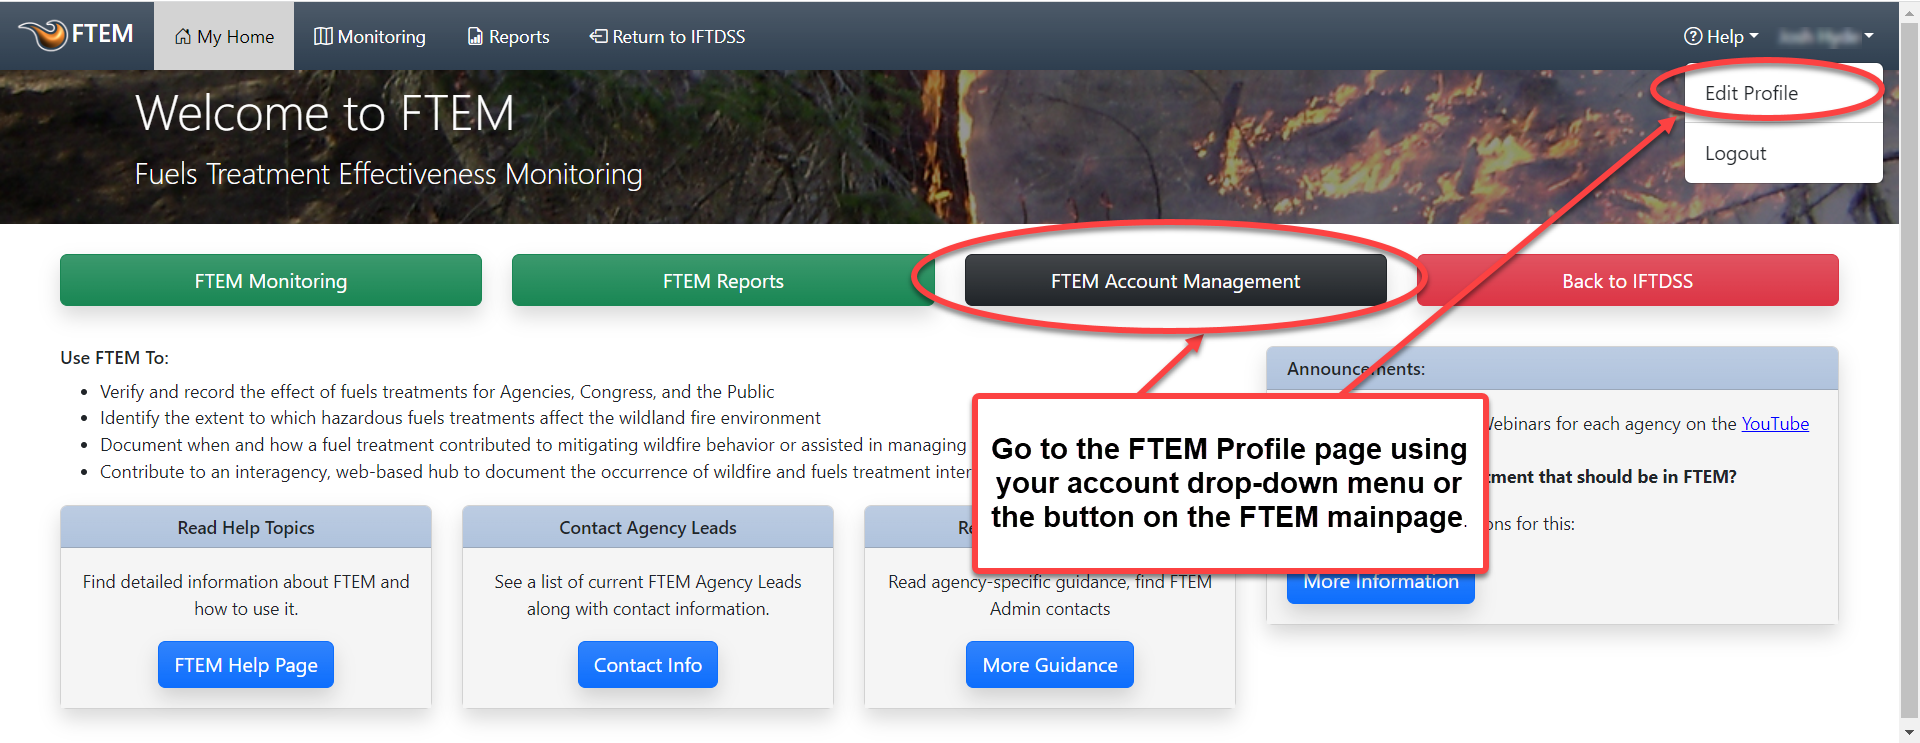 Account profile can be found on the FTEM main page either by clicking the 'FTEM Account Management' button, or scrolling to the top right of the screen and clicking on your username.